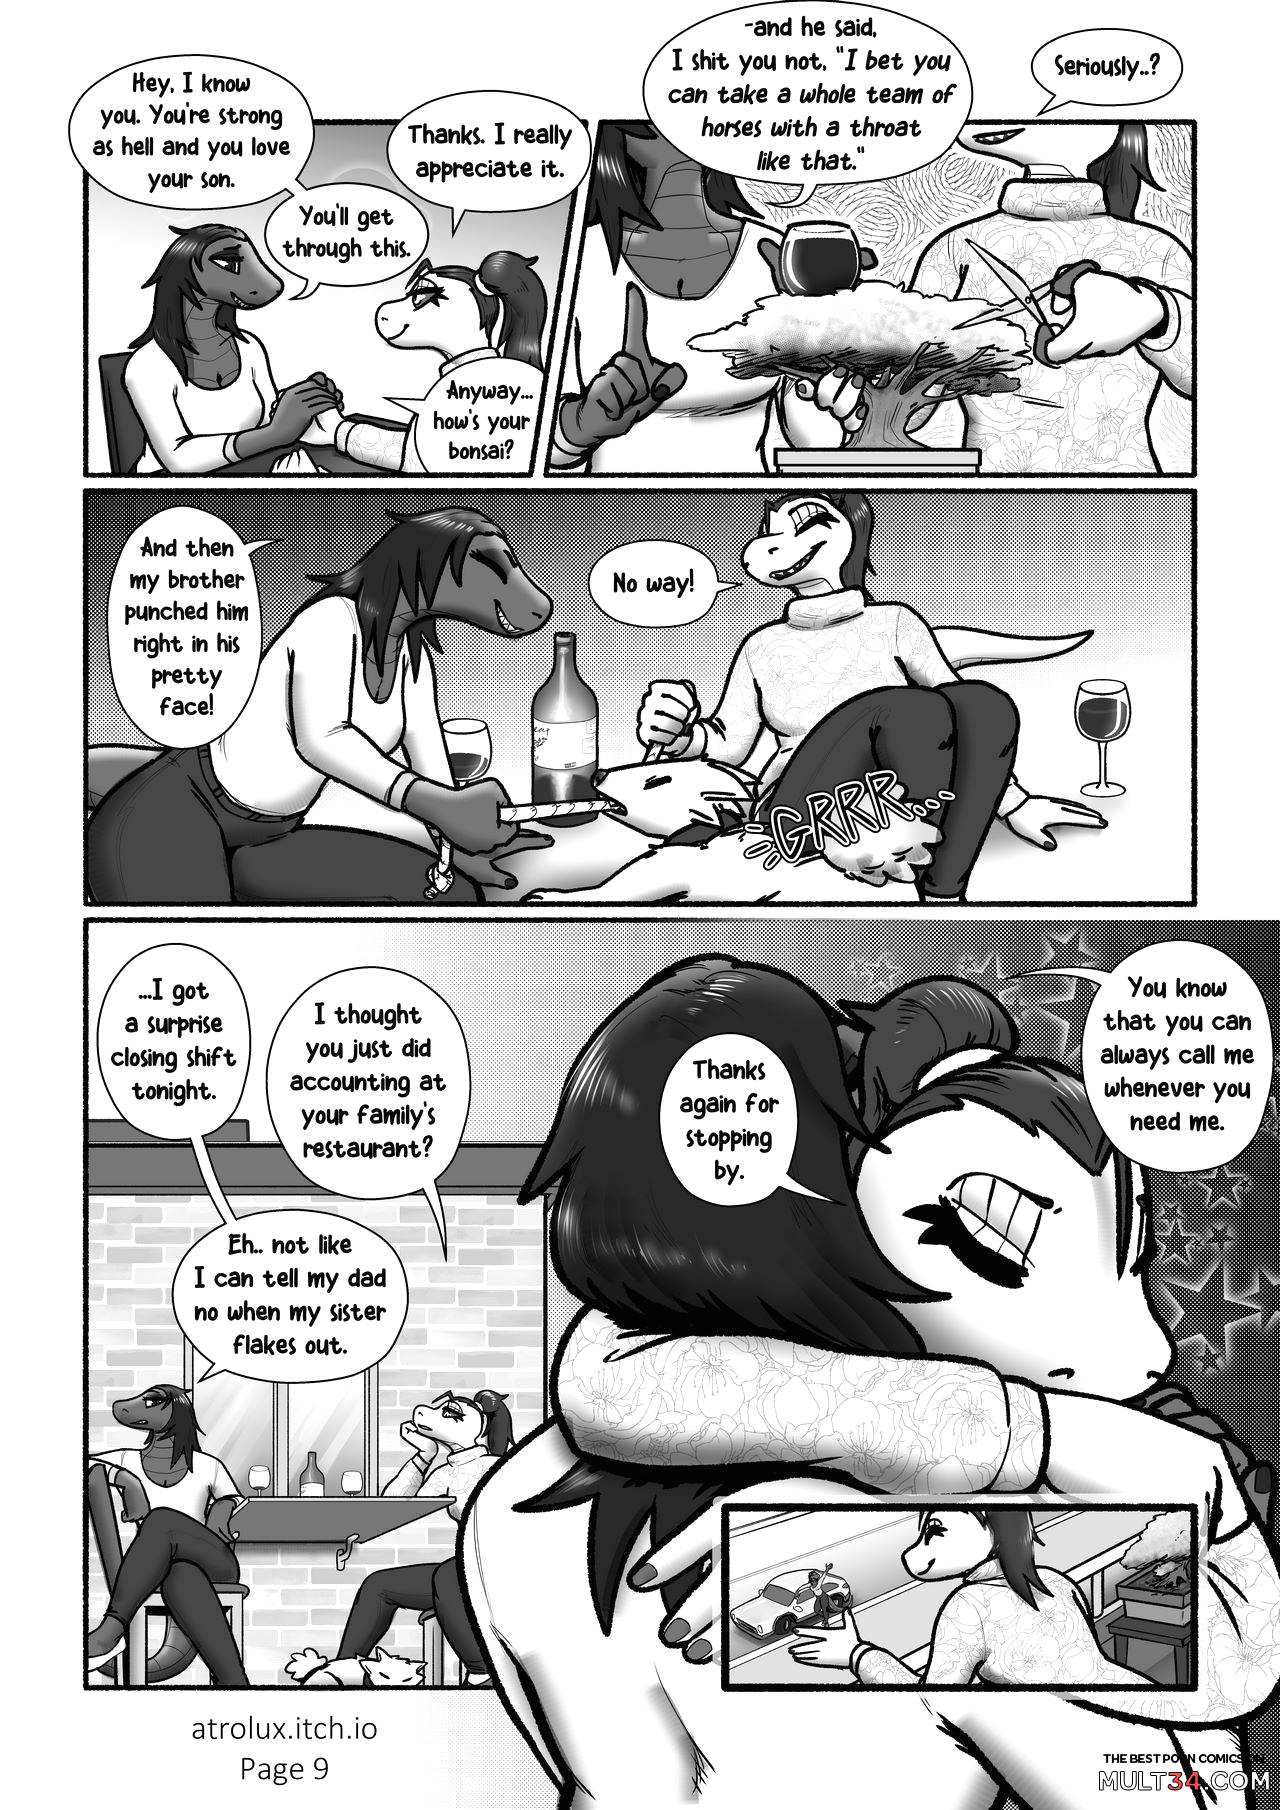 Shedding Inhibitions 6 - Feigned Innocence page 12